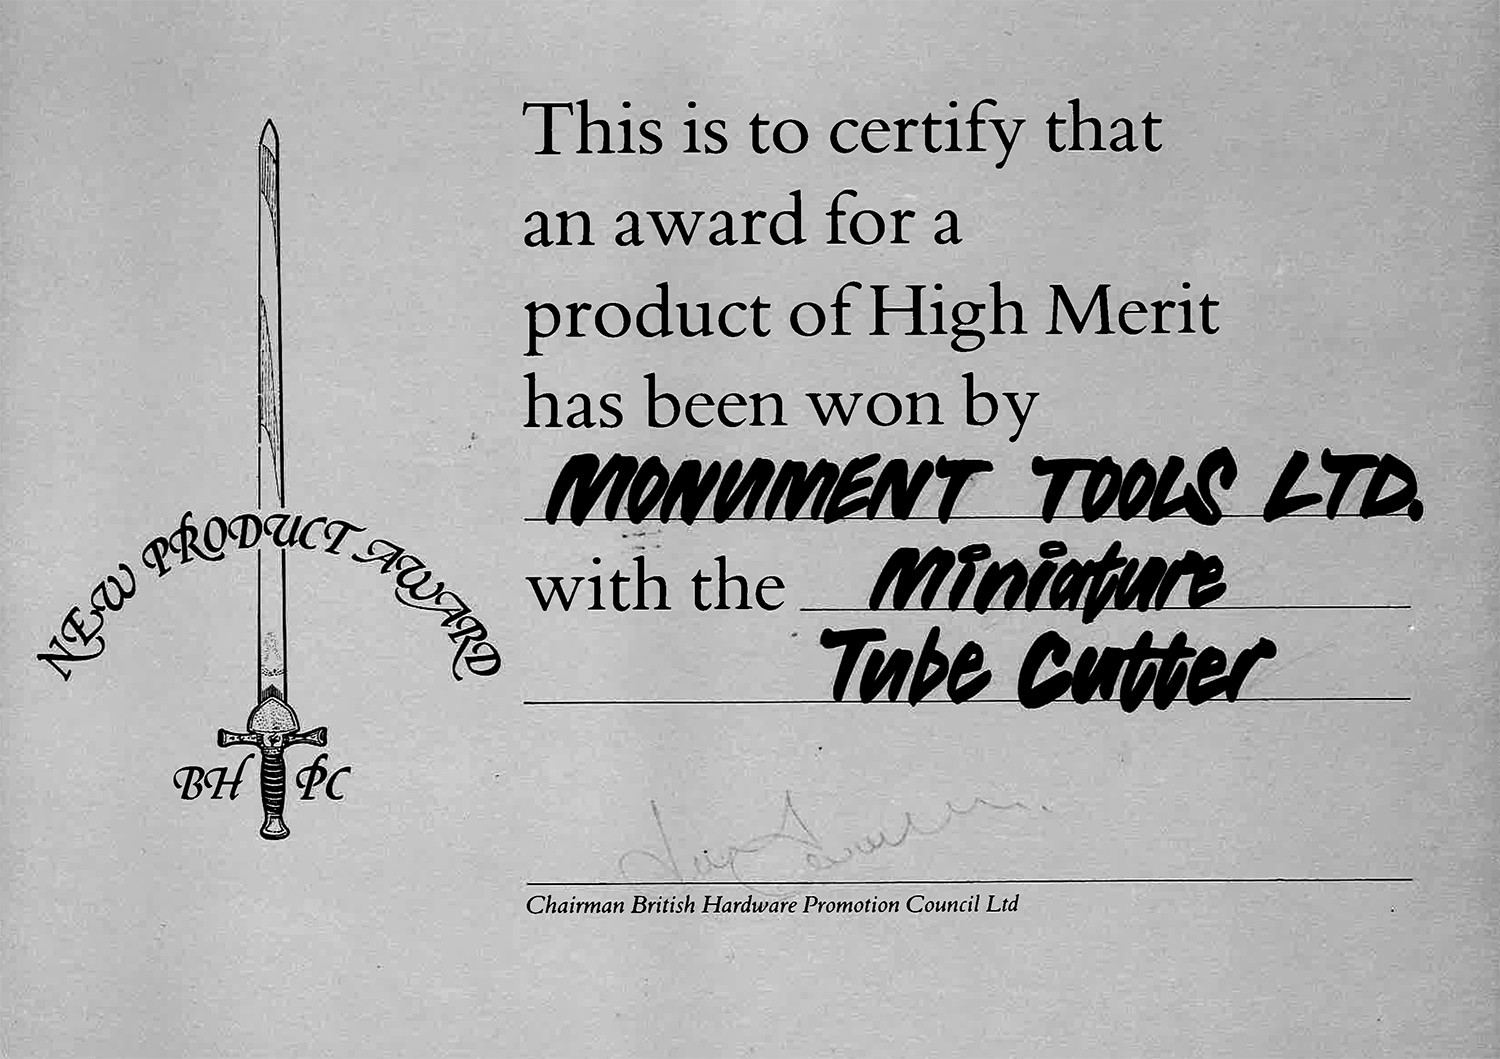 1982 – 84: Awards and patents